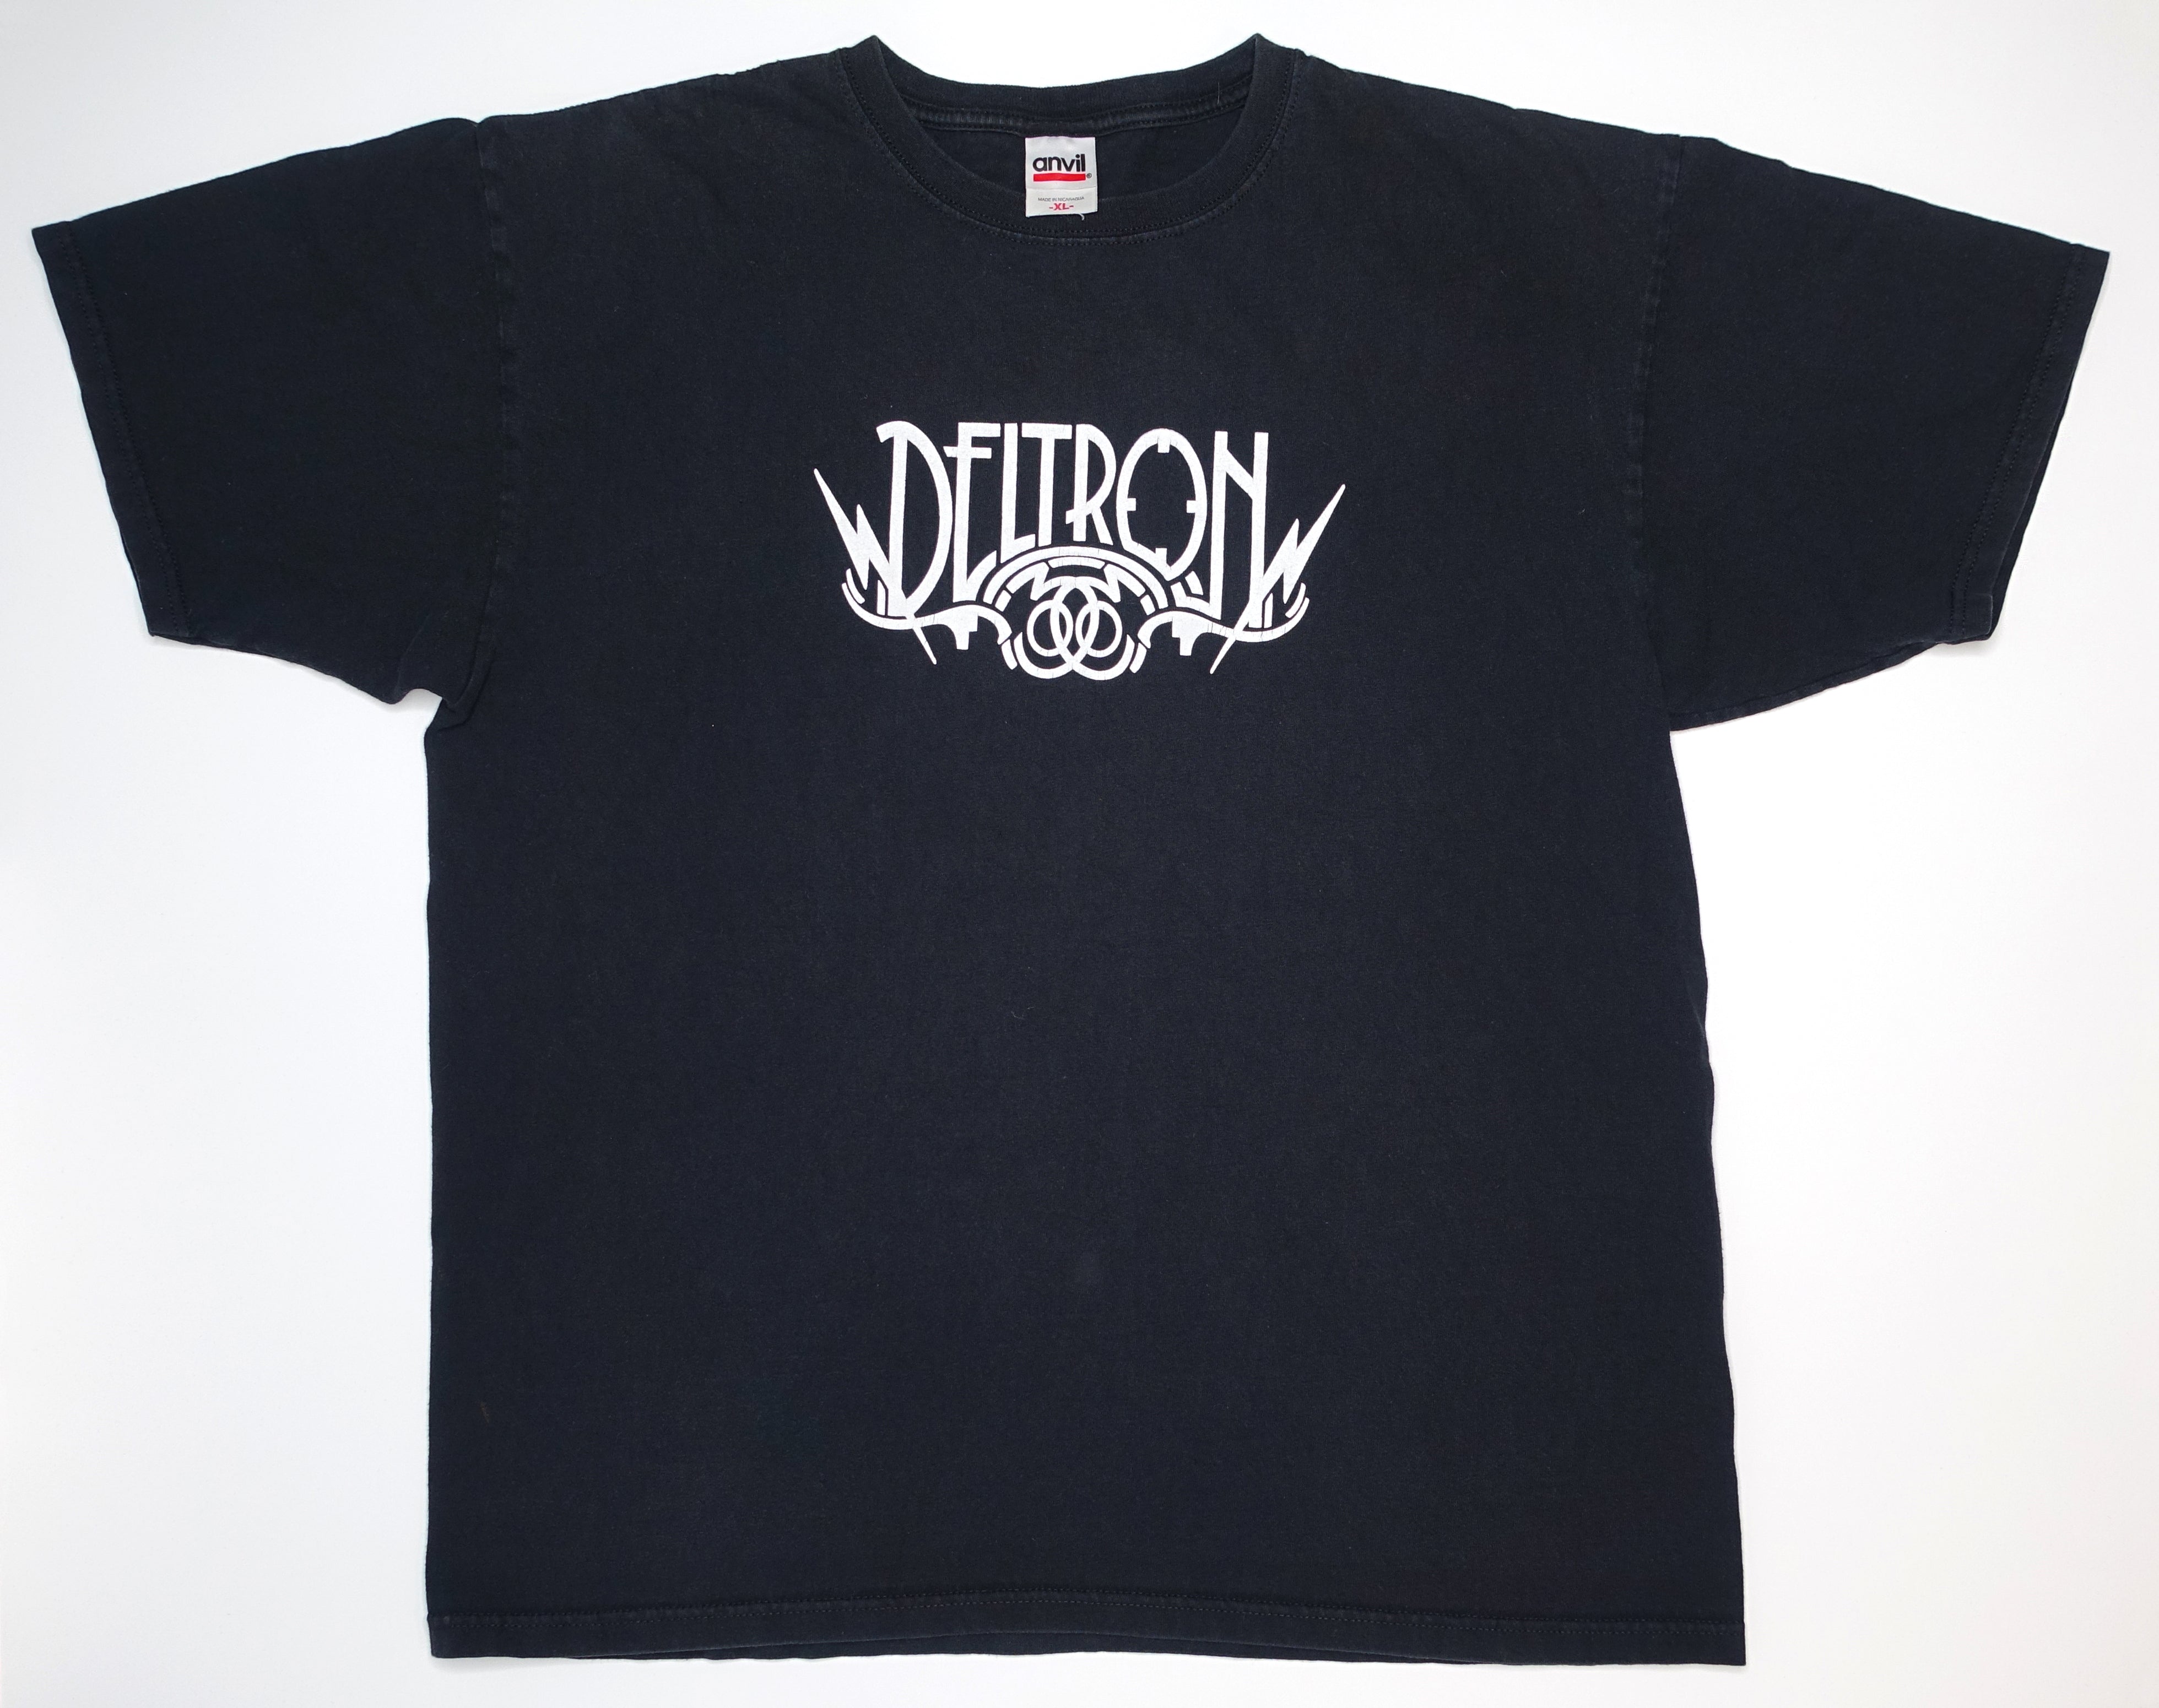 Deltron 3030 - City Rising From The Ashes 2013 Tour Shirt Size XL